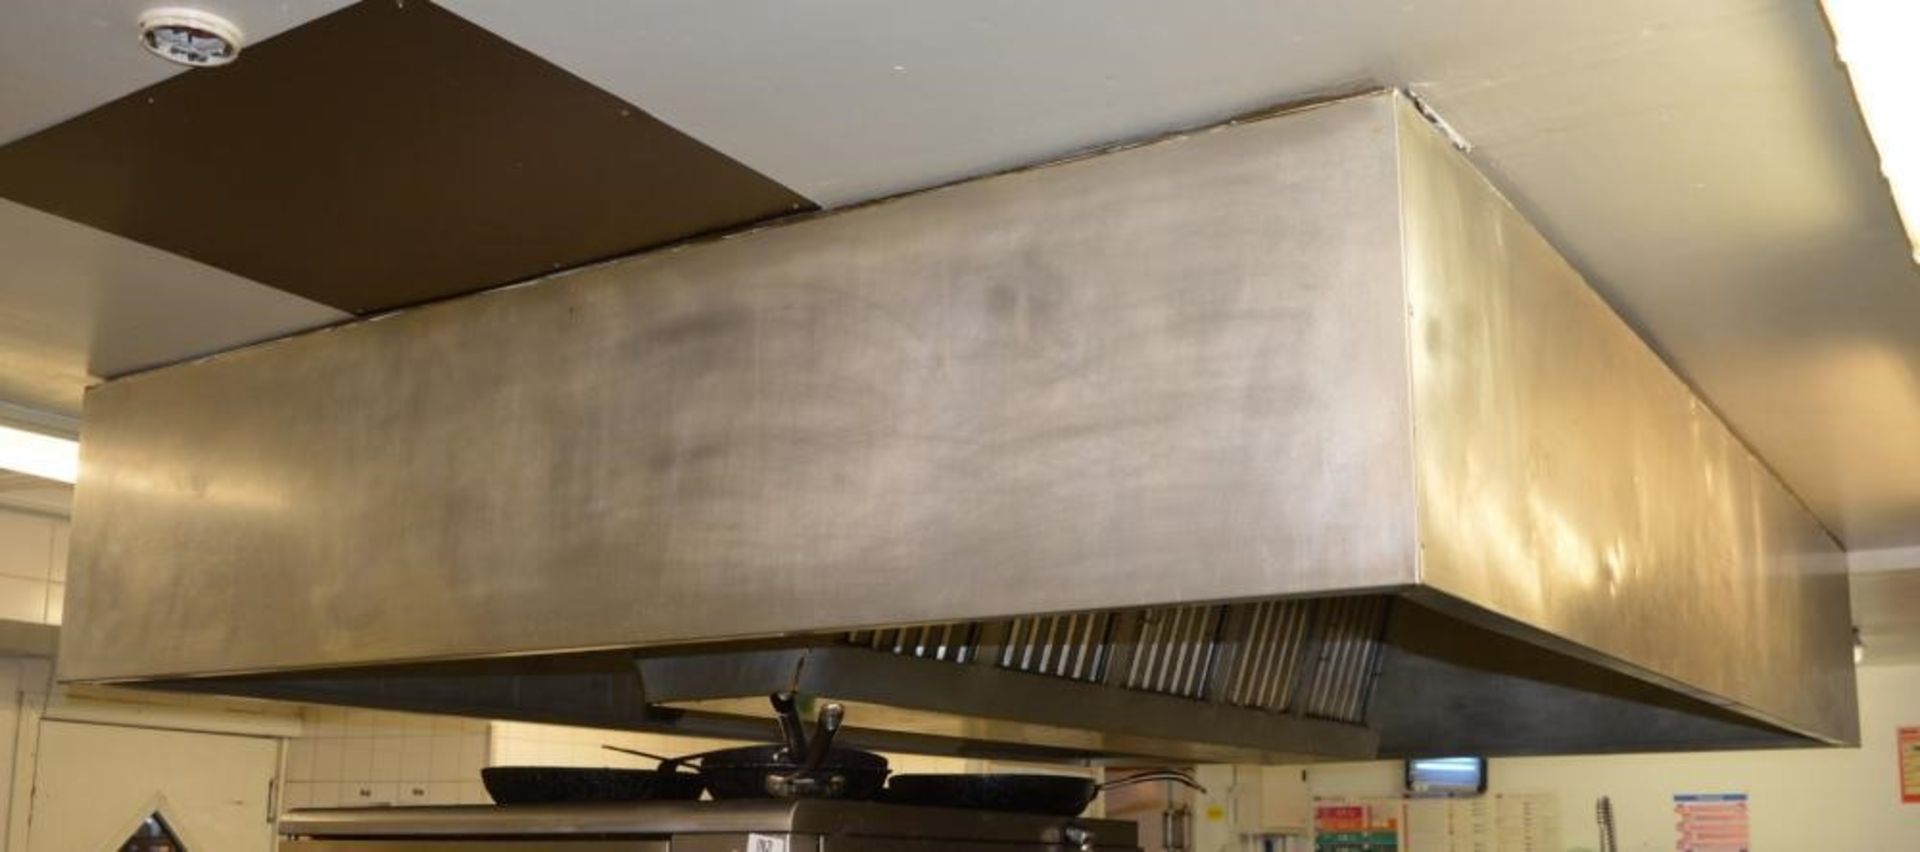 1 x Stainless Steel Canopy Extractor Hood With Filters - H46 x W232 x L351 cms - Filter Unit 250 x 5 - Image 4 of 4